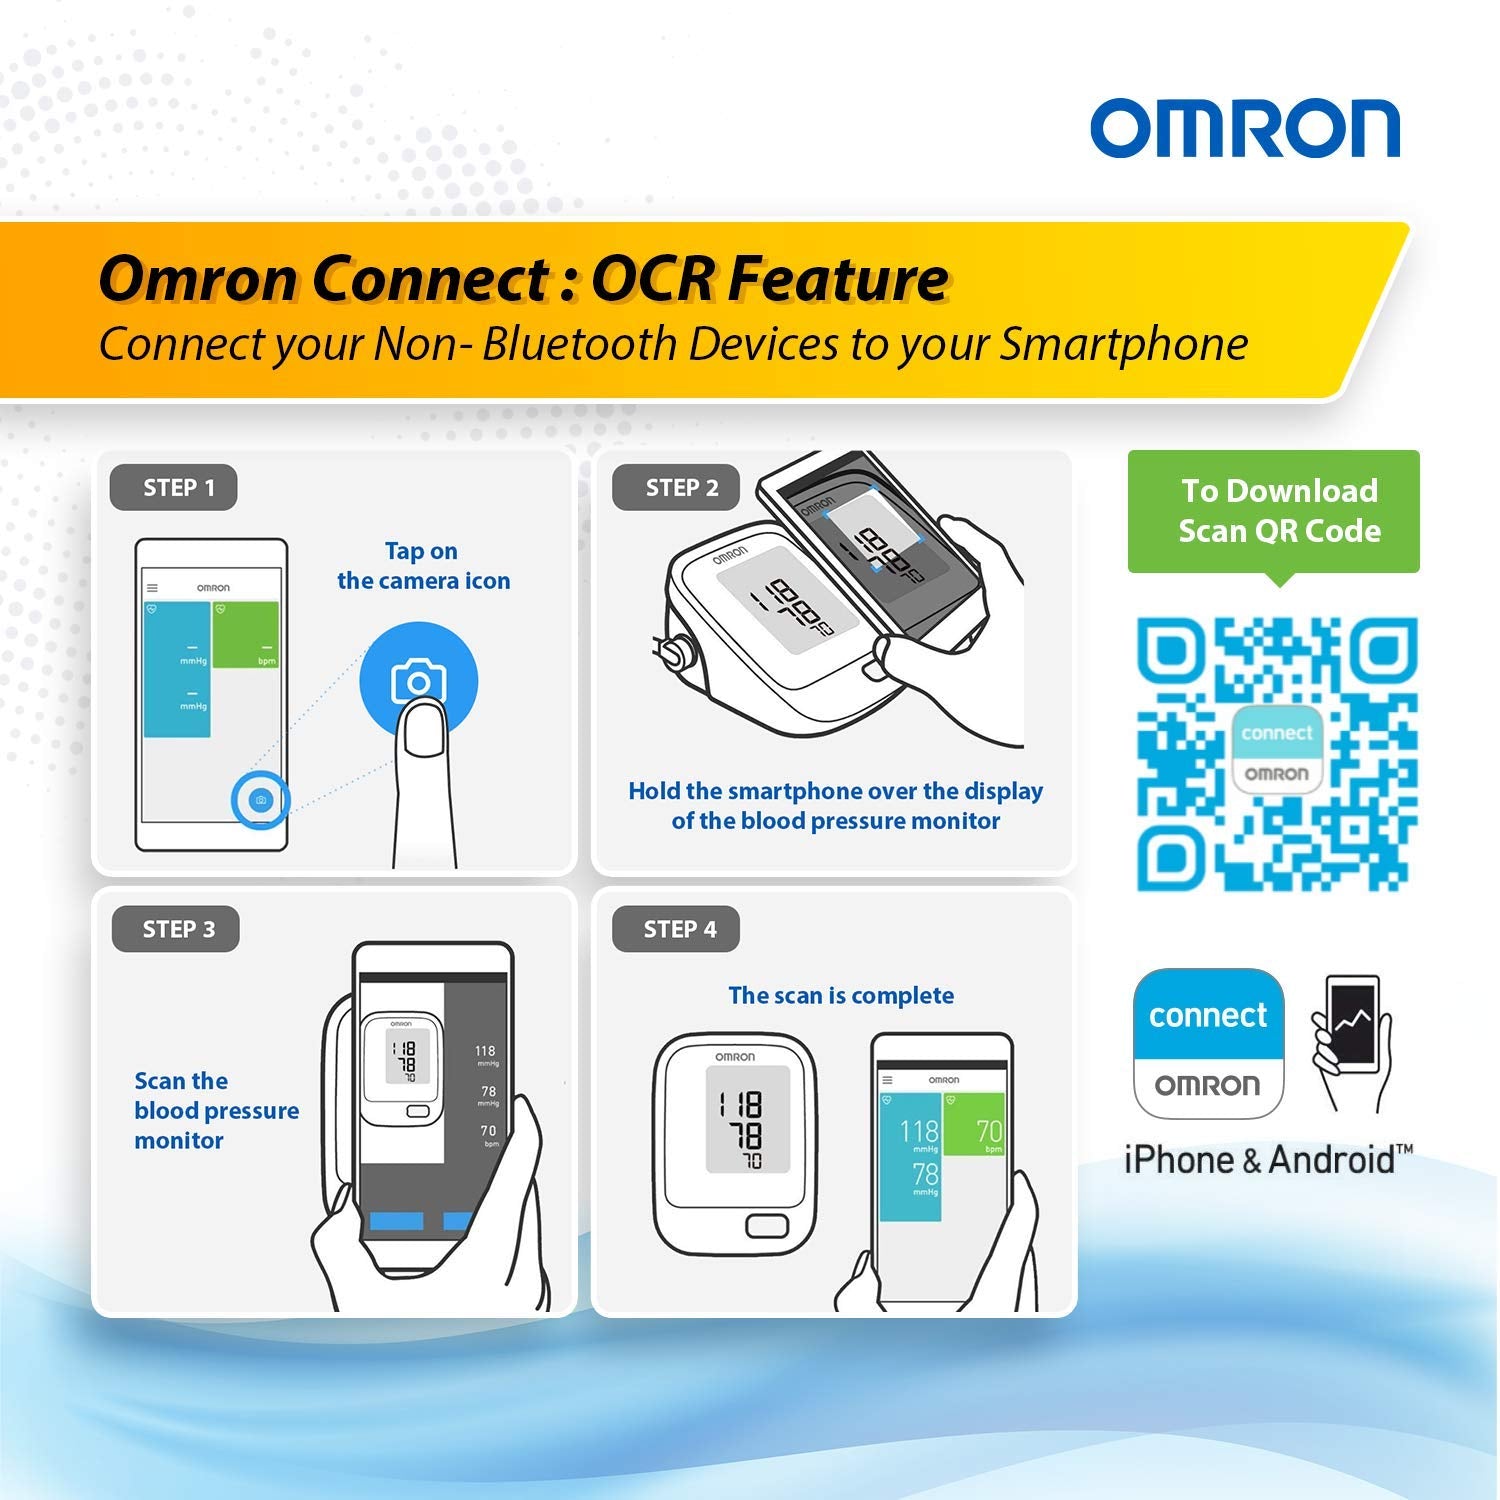 Omron HEM 7121J Fully Automatic Digital Blood Pressure Monitor with Intellisense Technology & Cuff Wrapping Guide for Most Accurate Measurement (White)